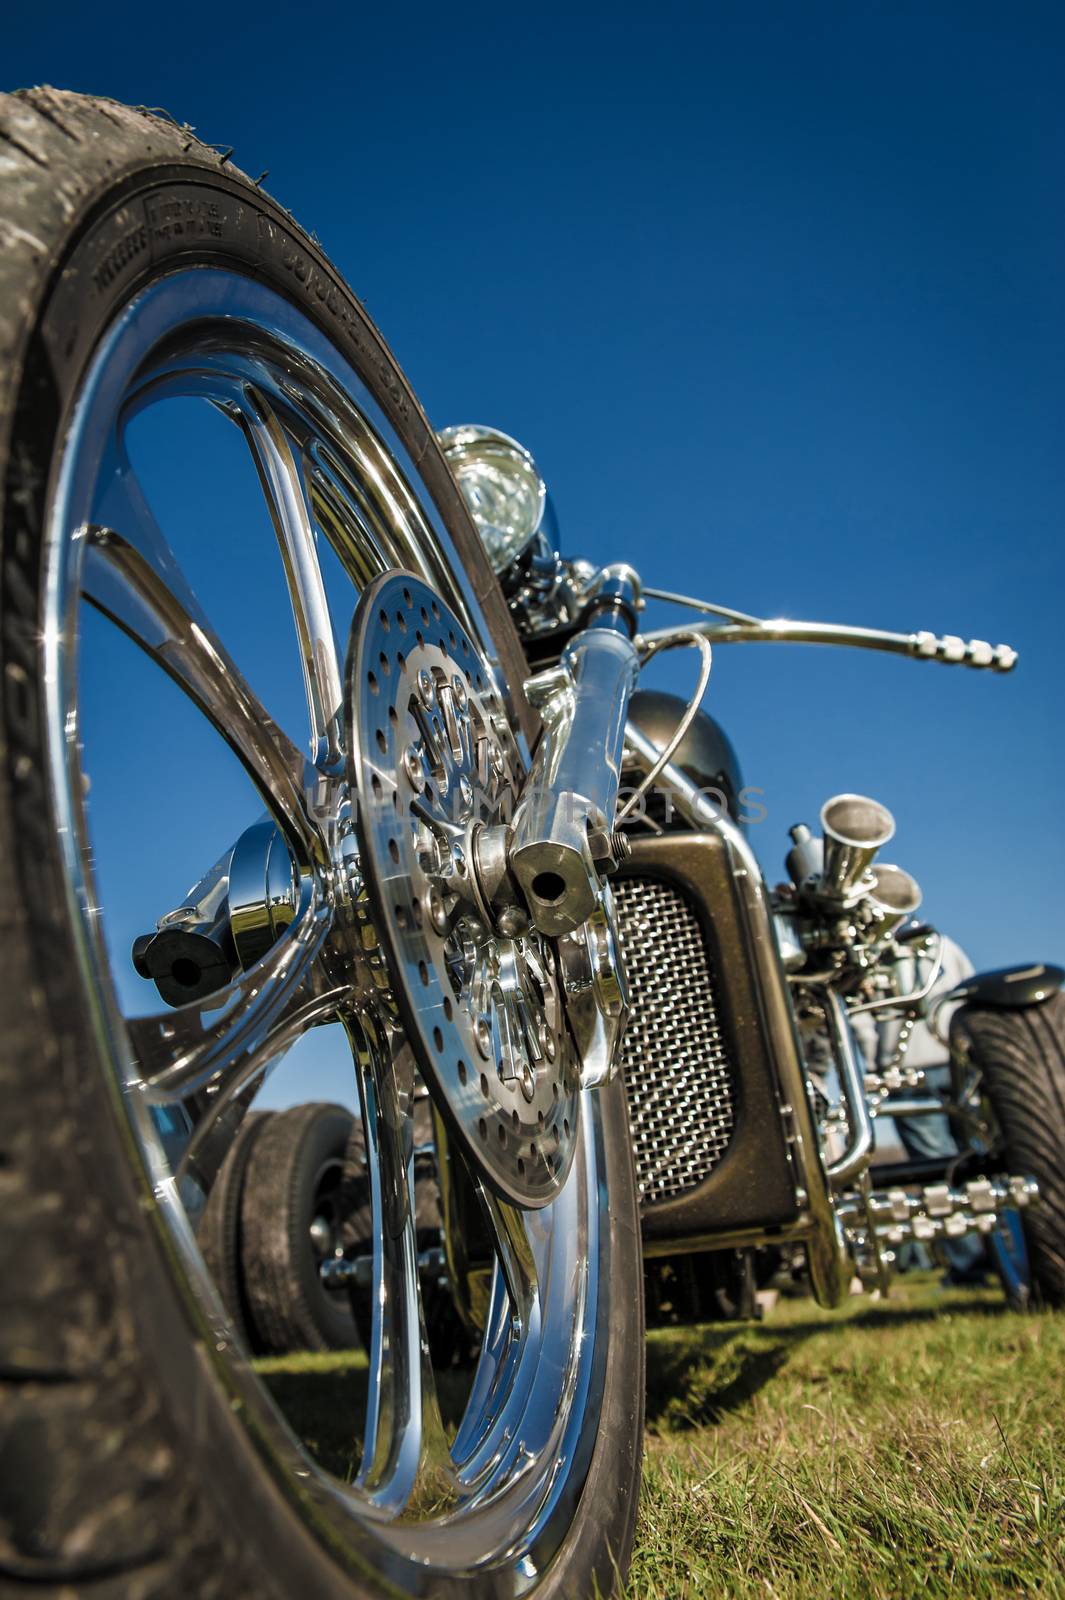 chromed motorcycle trike abstract against a blue sky